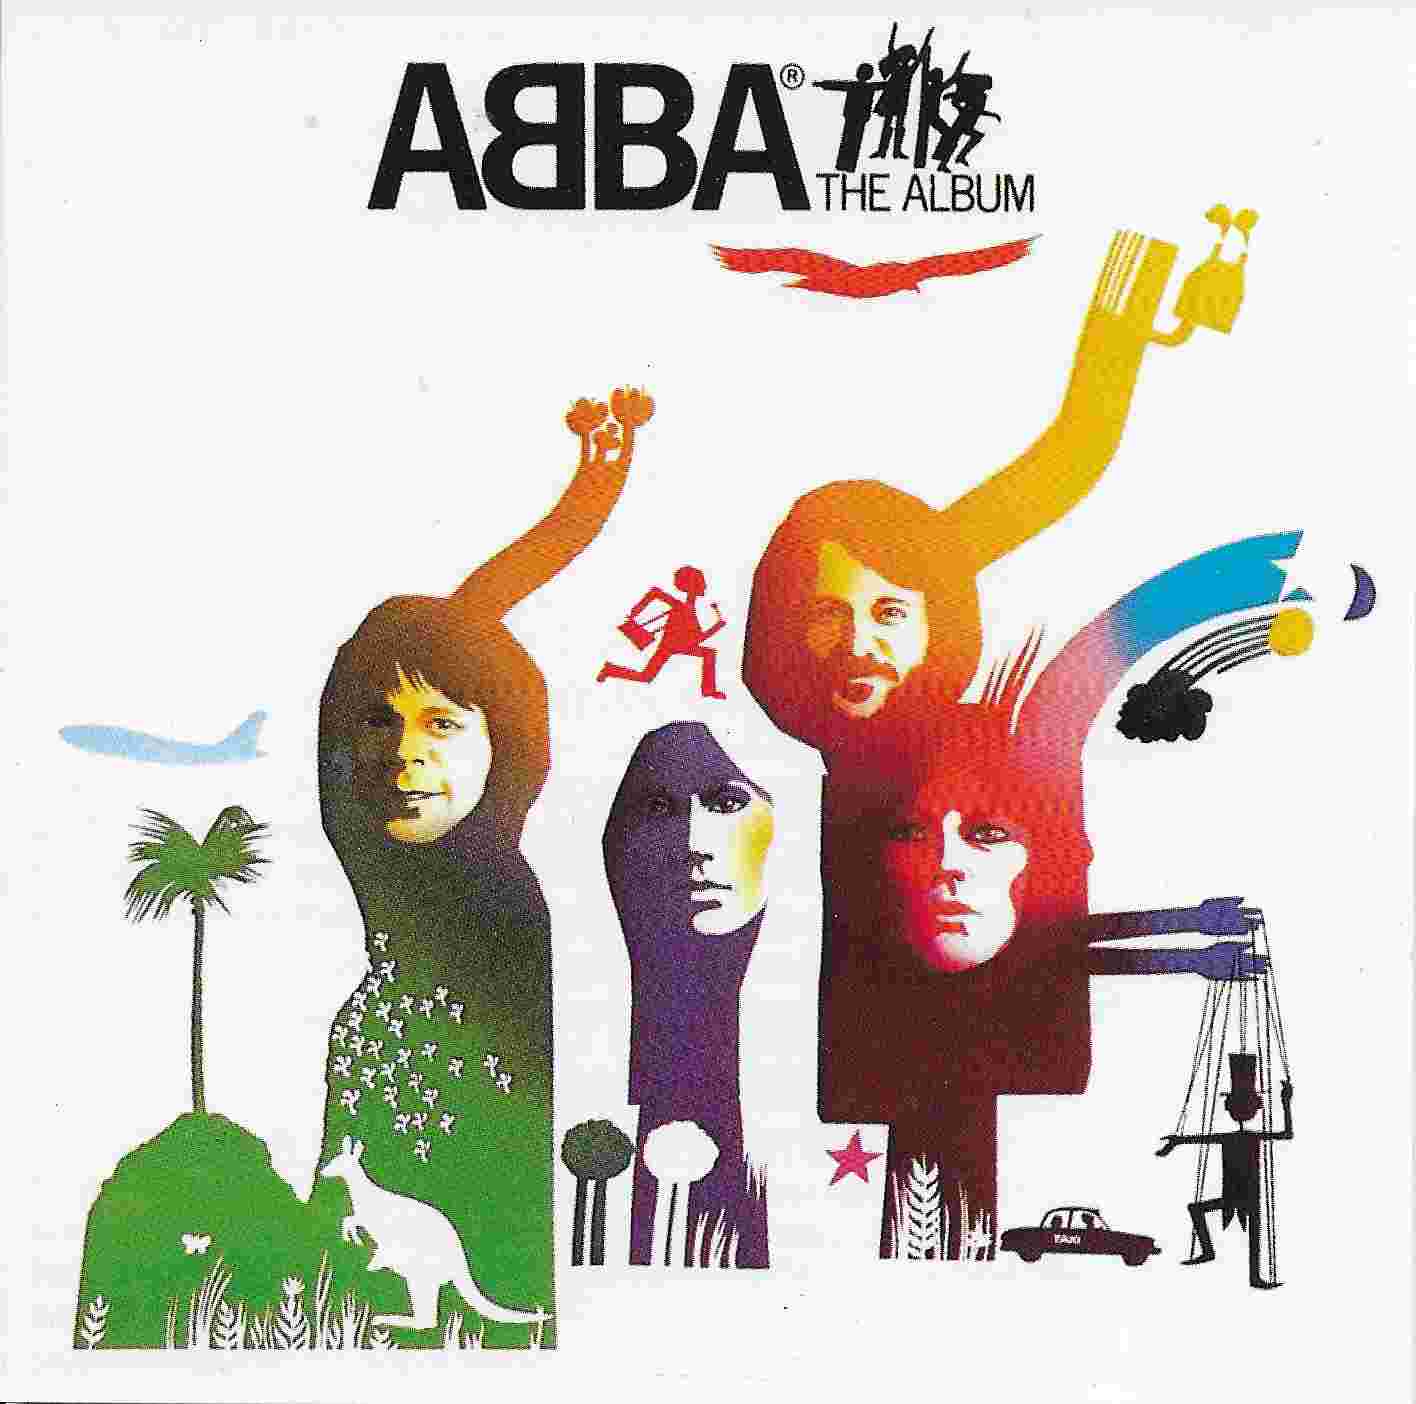 Picture of 533980 - 2 Abba - The album by artist Abba 